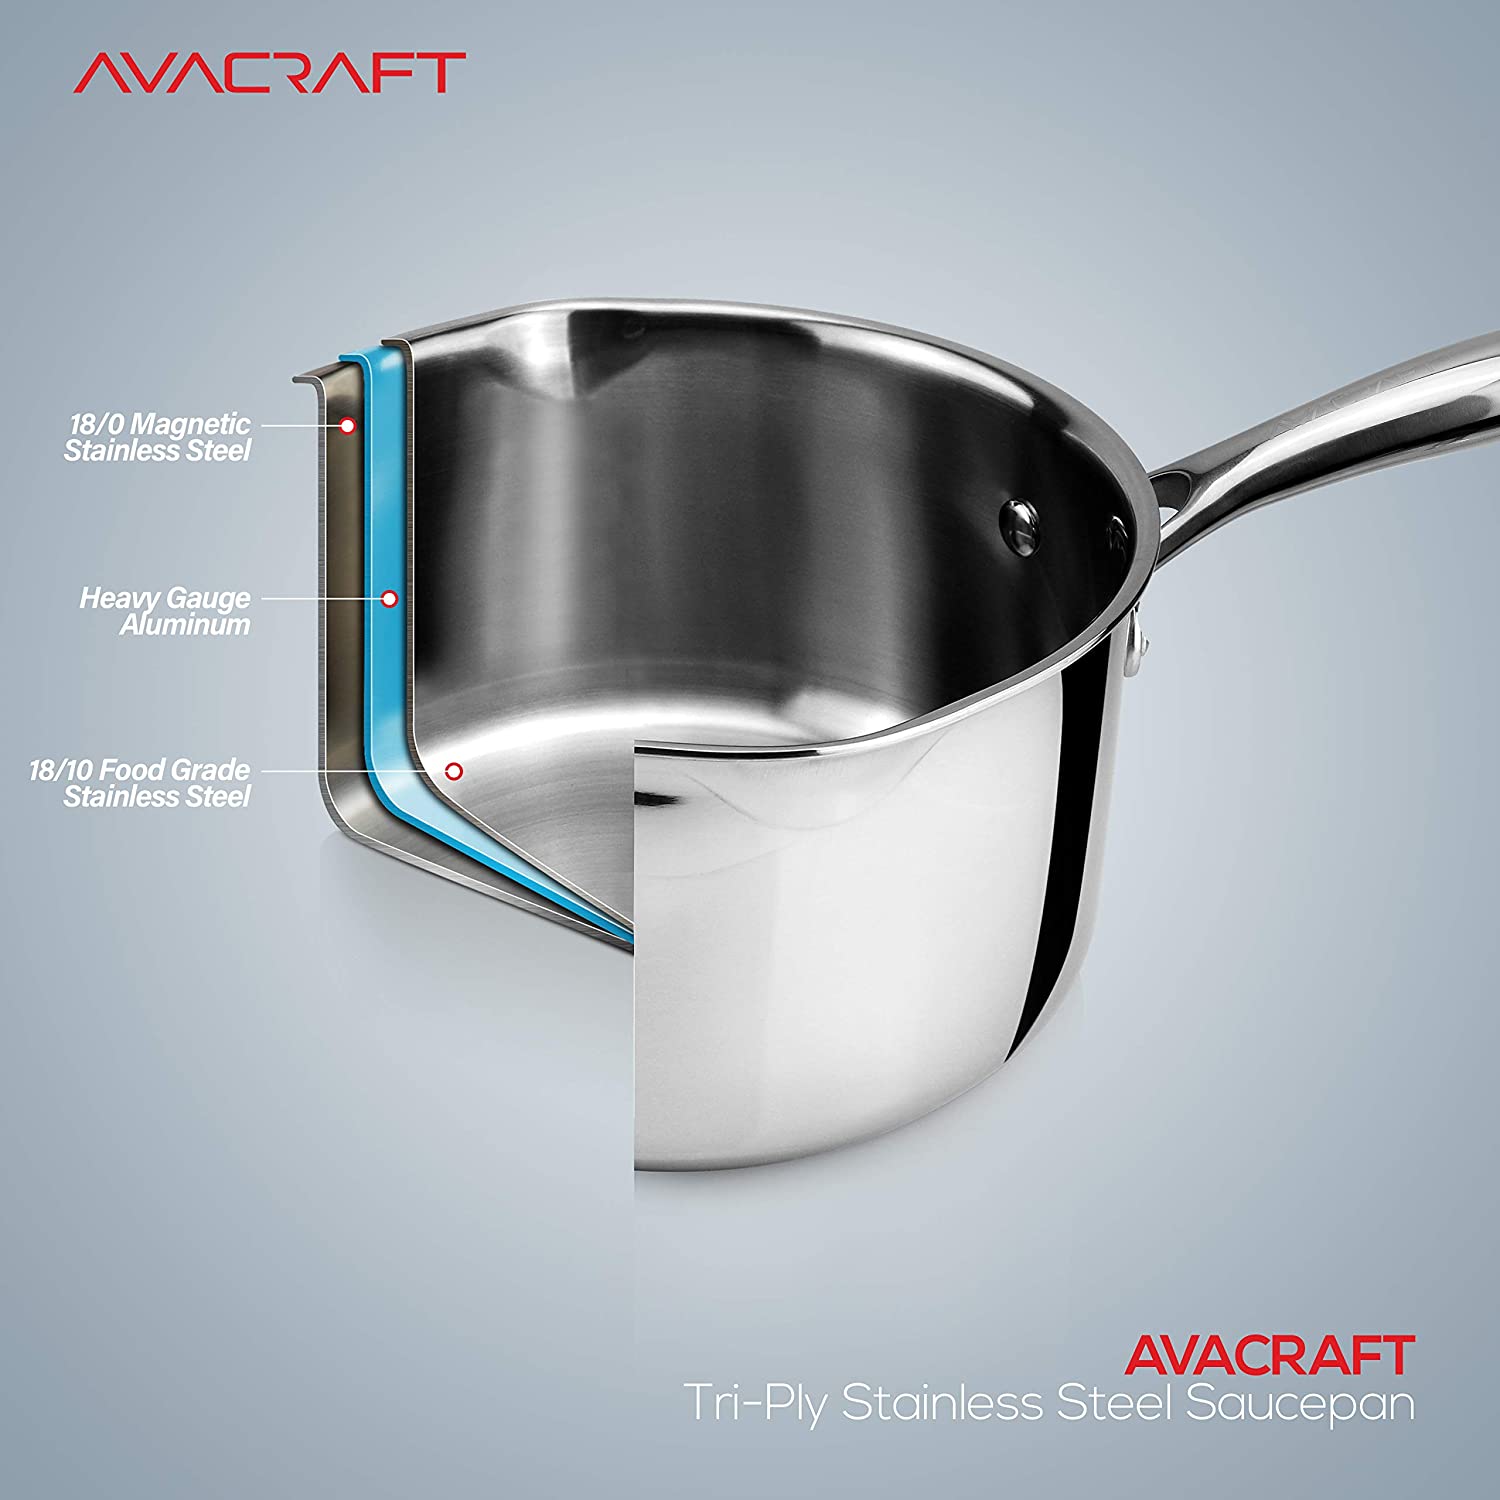 AVACRAFT Top Rated Tri-Ply Stainless Steel Saucepan with Glass Straine